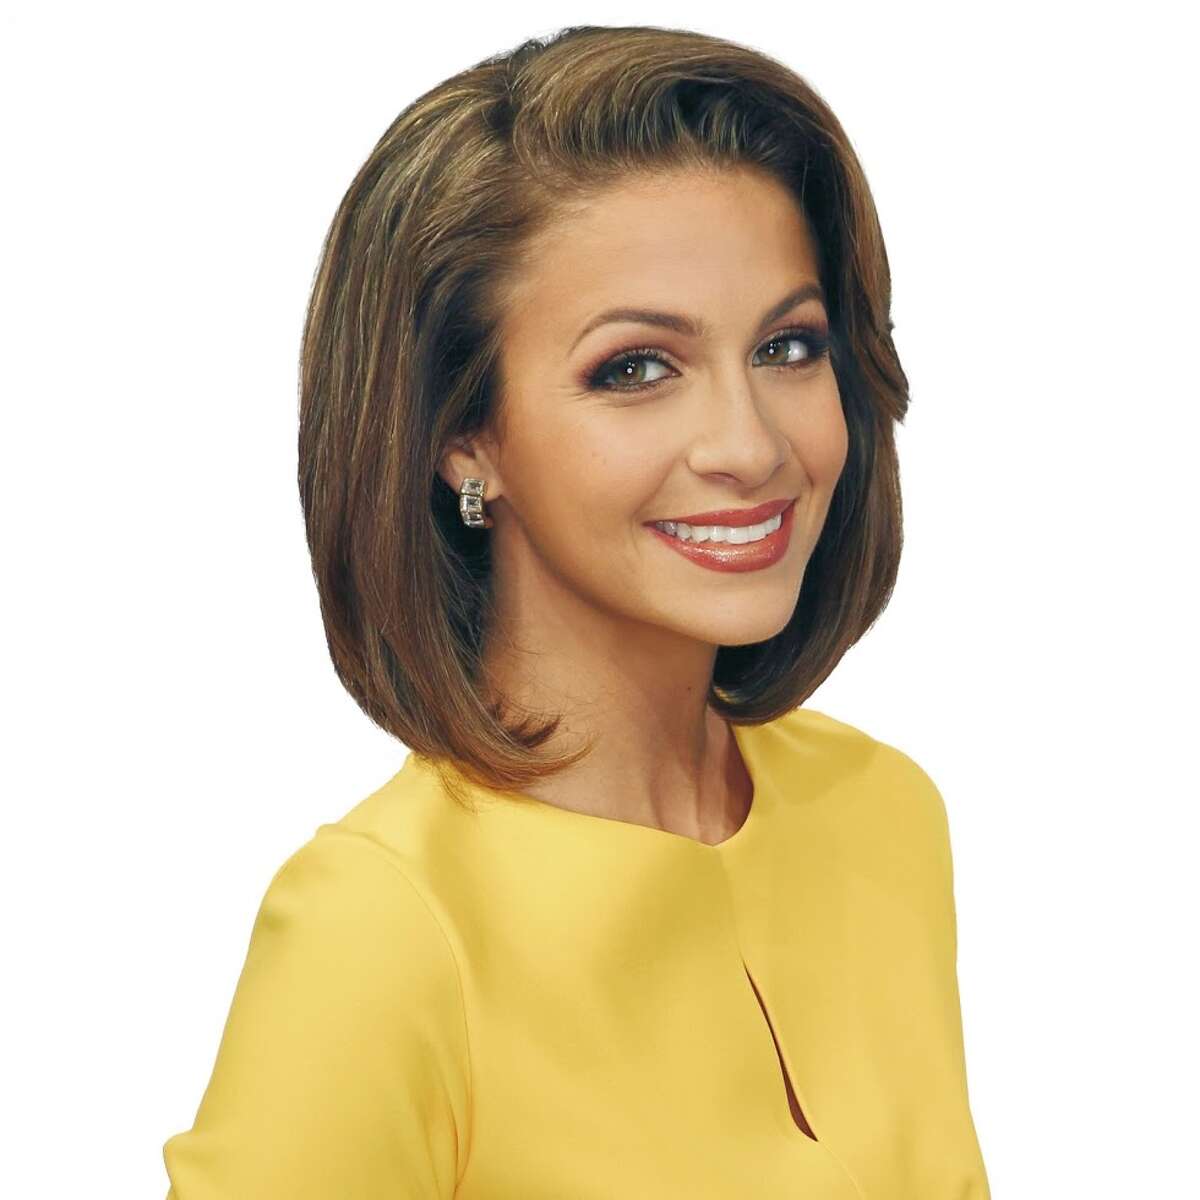 Fox26 evening anchor Kaitlin Monte is expecting her second child. >>> Scroll through to see more on Kaitlin Monte.